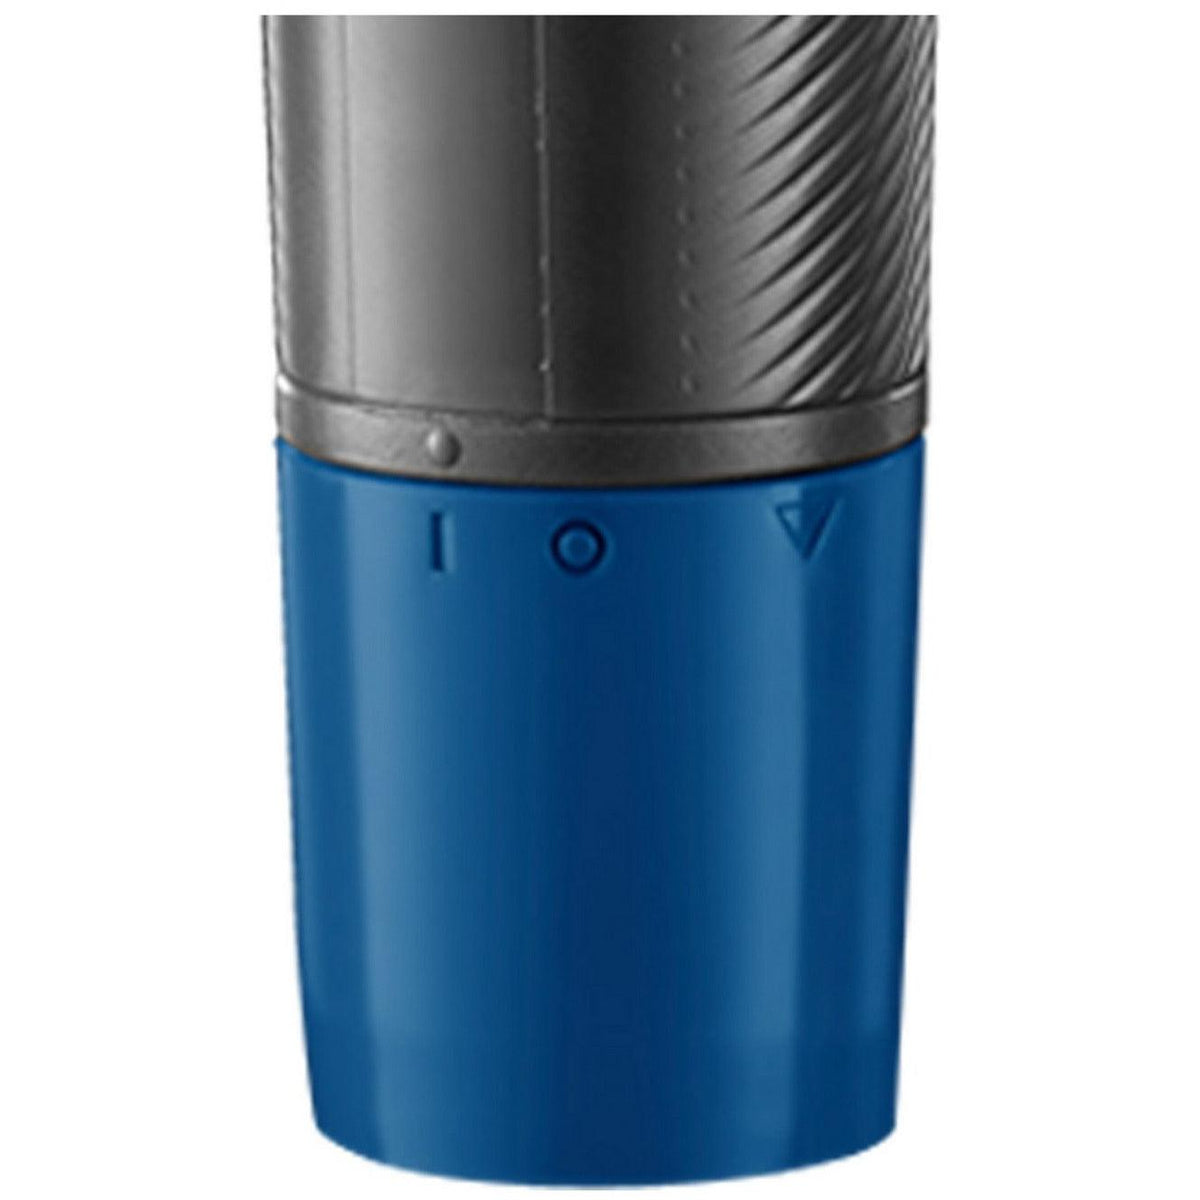 Remington Nano Series Nose and Ear Trimmer - Black &amp; Blue | NE3850 from DID Electrical - guaranteed Irish, guaranteed quality service. (6890783637692)